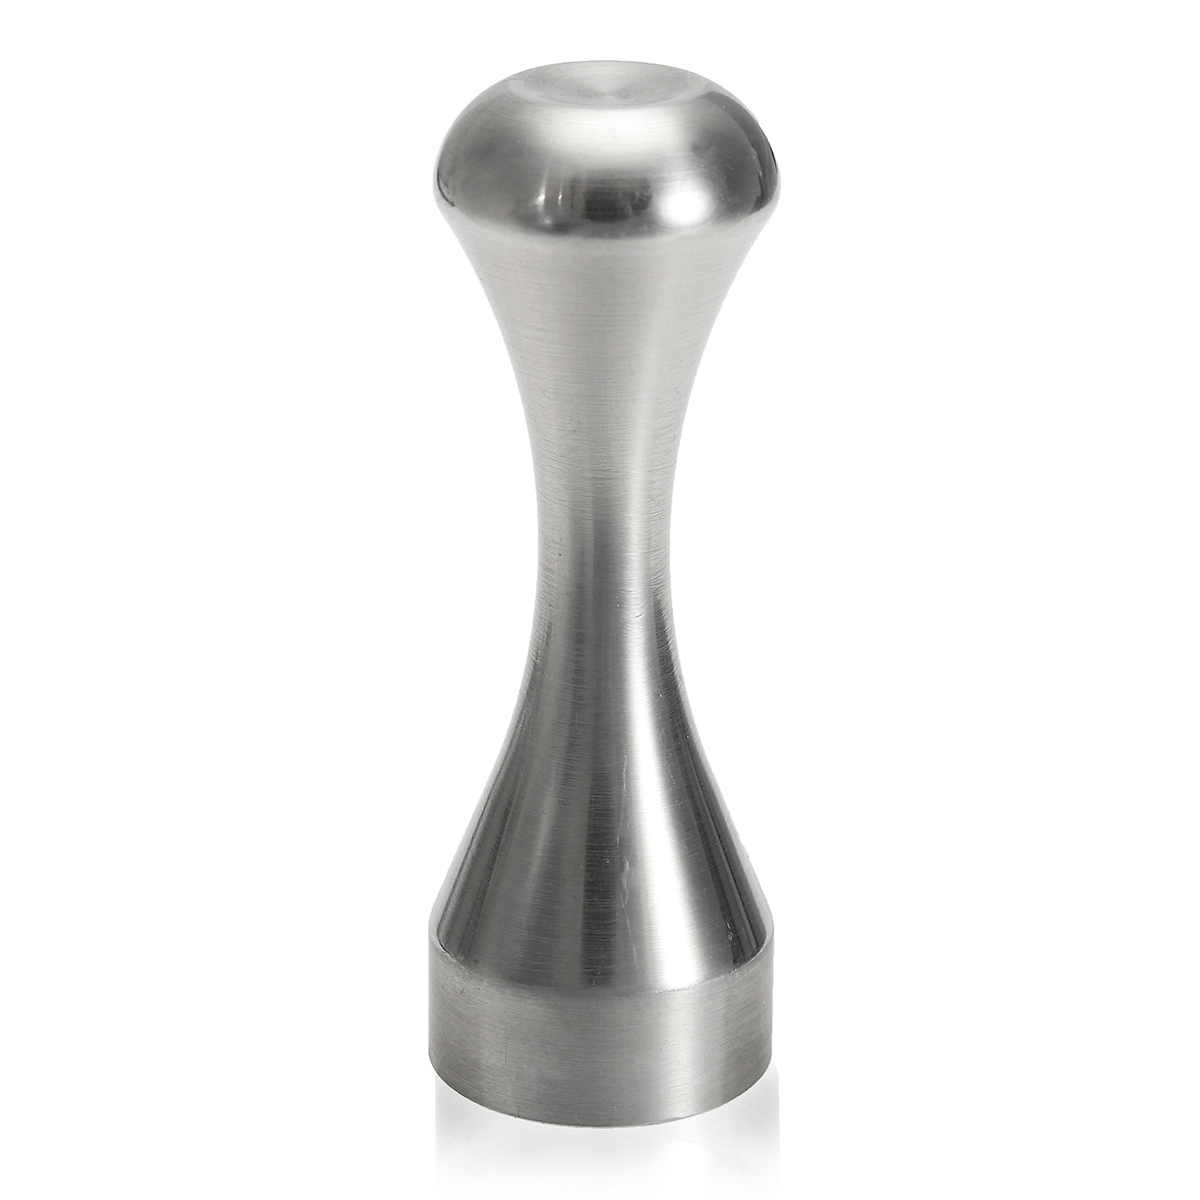 Stainless-Steel-Coffee-Tamper-For-Refillable-Reusable-Capsule-Coffee-Bean-Press-1166895-1